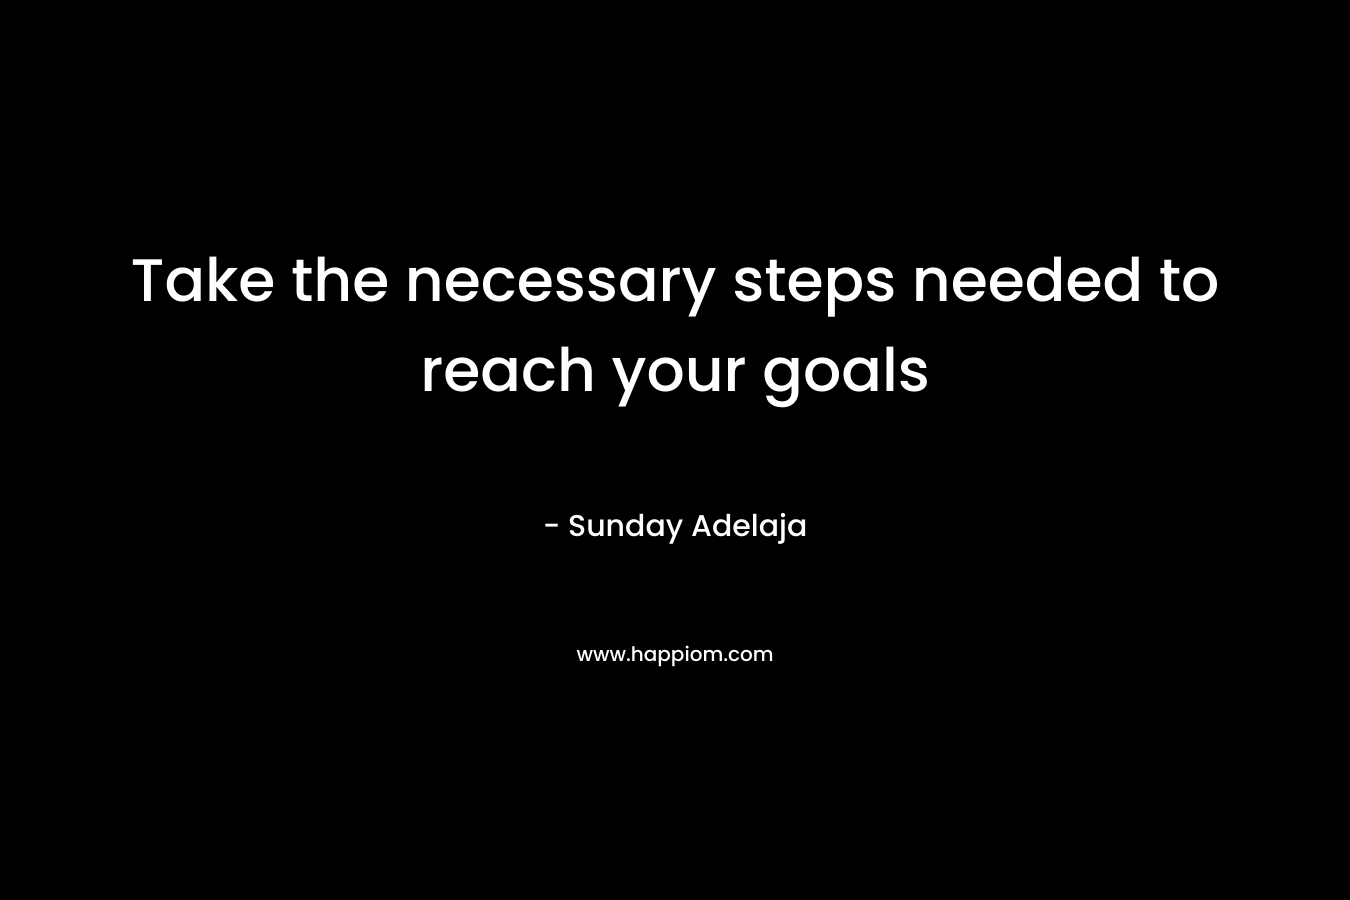 Take the necessary steps needed to reach your goals